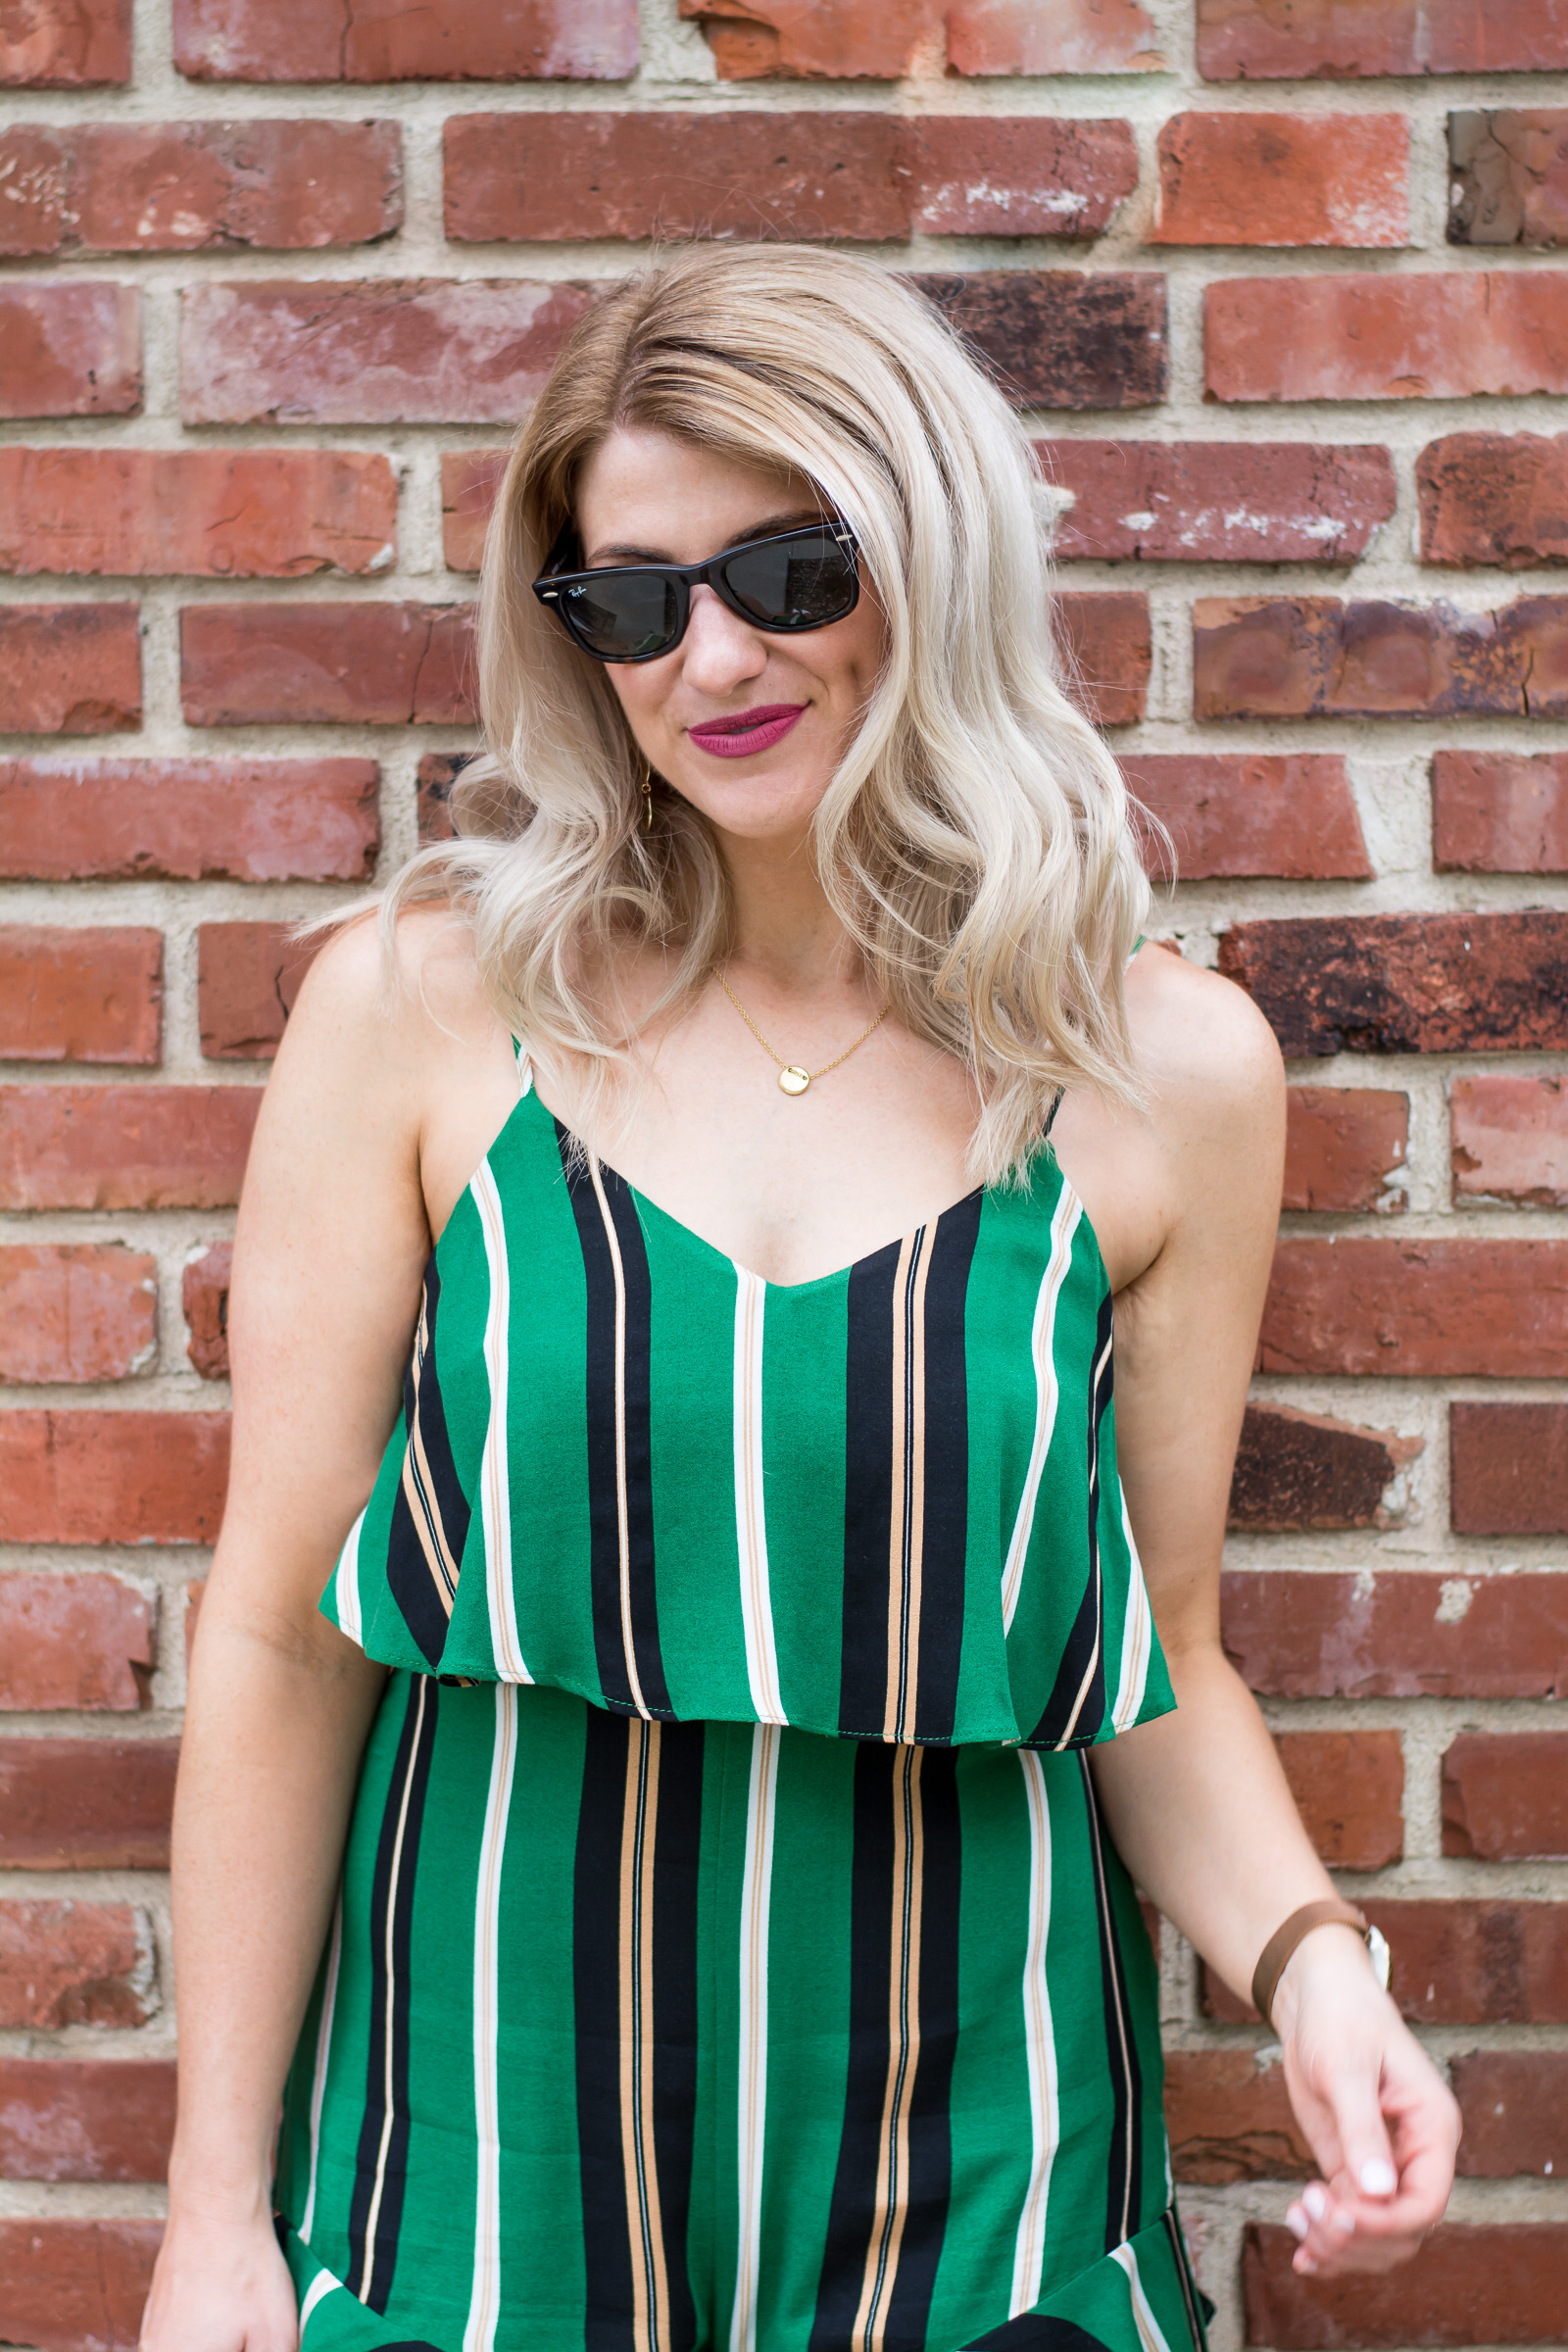 Green Striped Romper. | Ashley from LSR